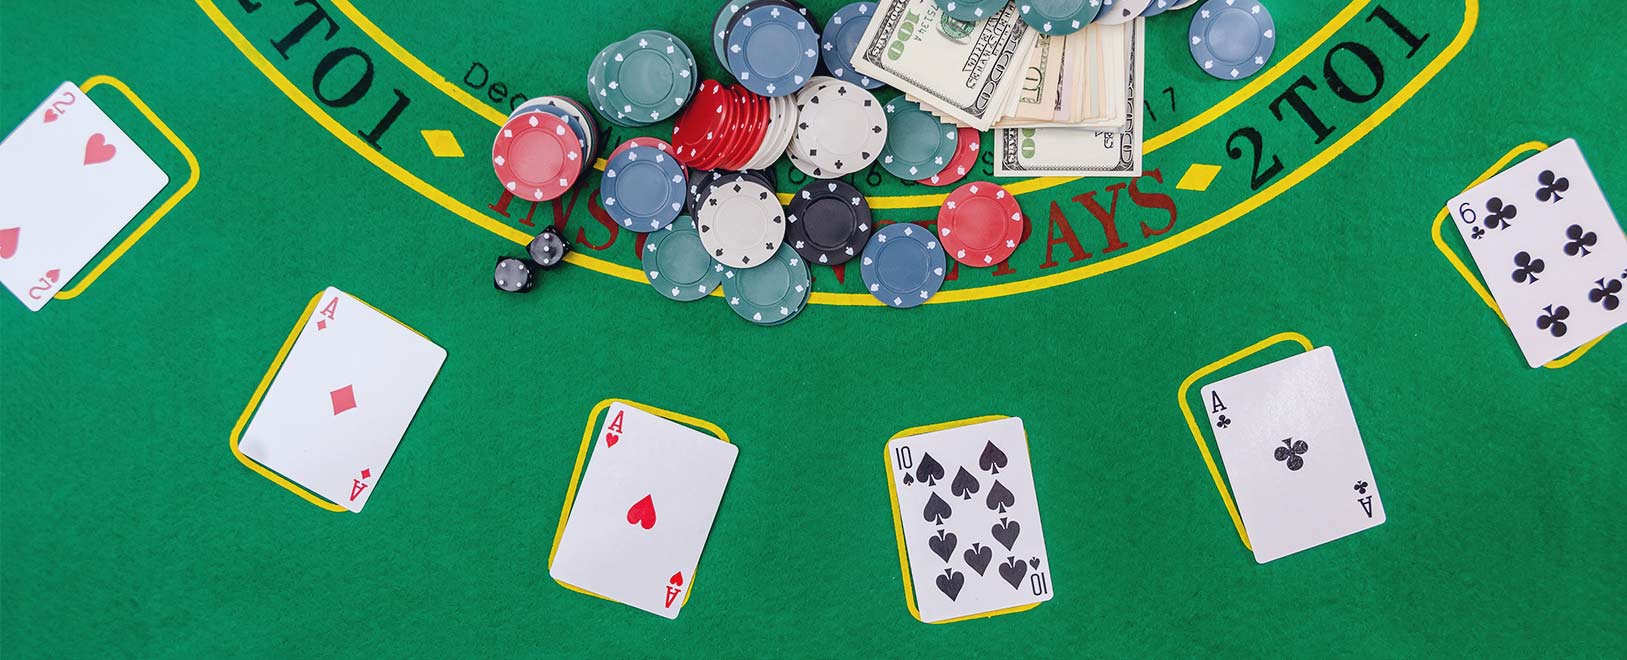 how to play blackjack online casino